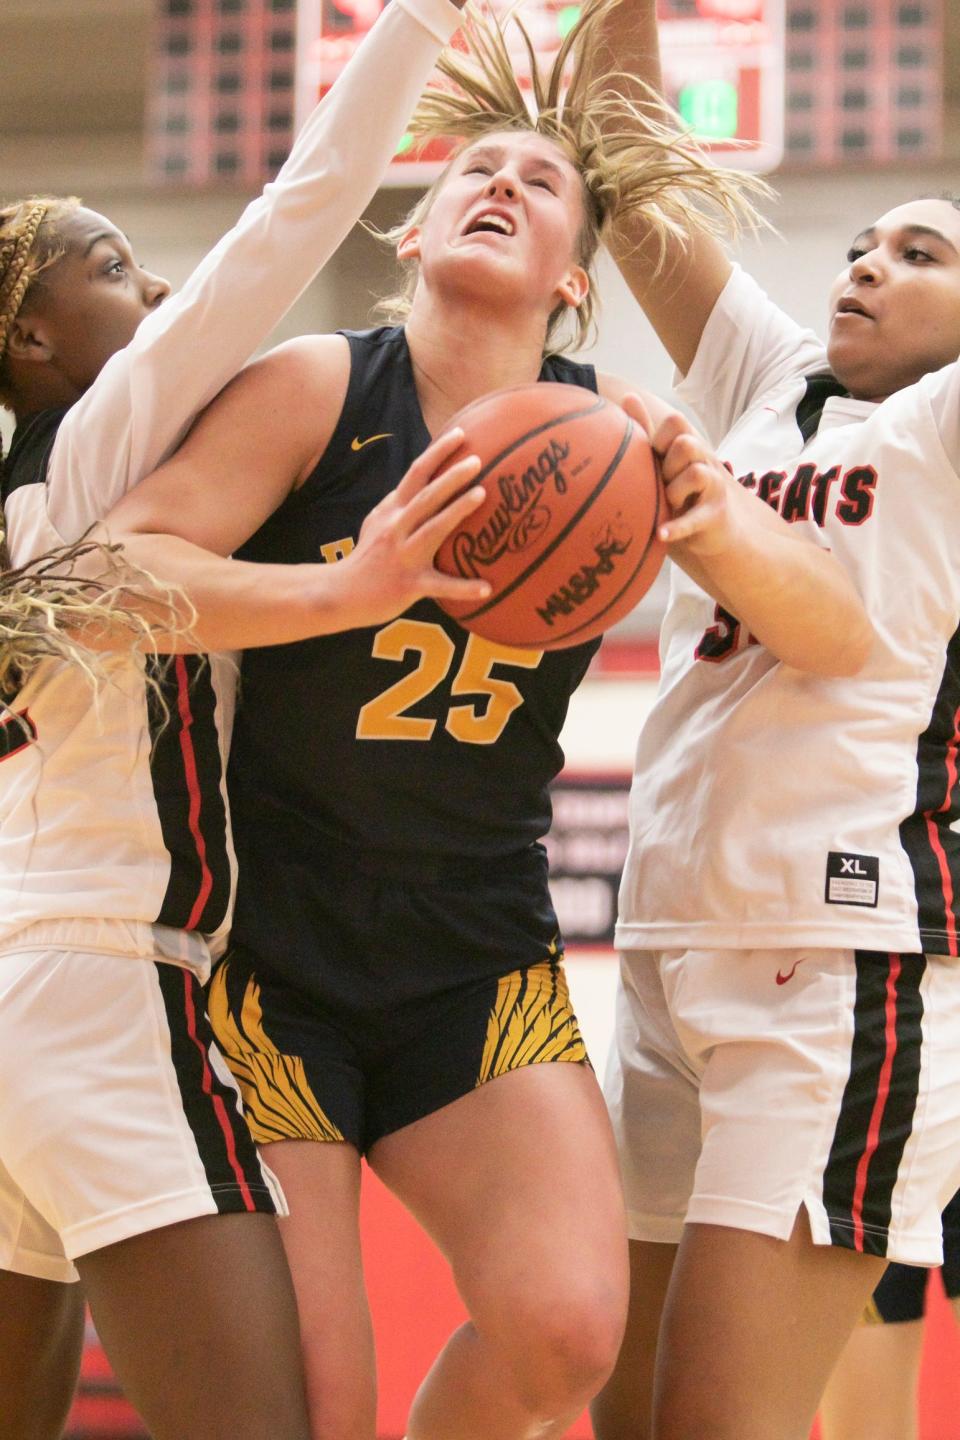 Hartland’s Sarah Rekowski (25) had 10 points and 12 rebounds in a 51-44 victory at Grand Blanc on Tuesday, Nov. 29, 2022.